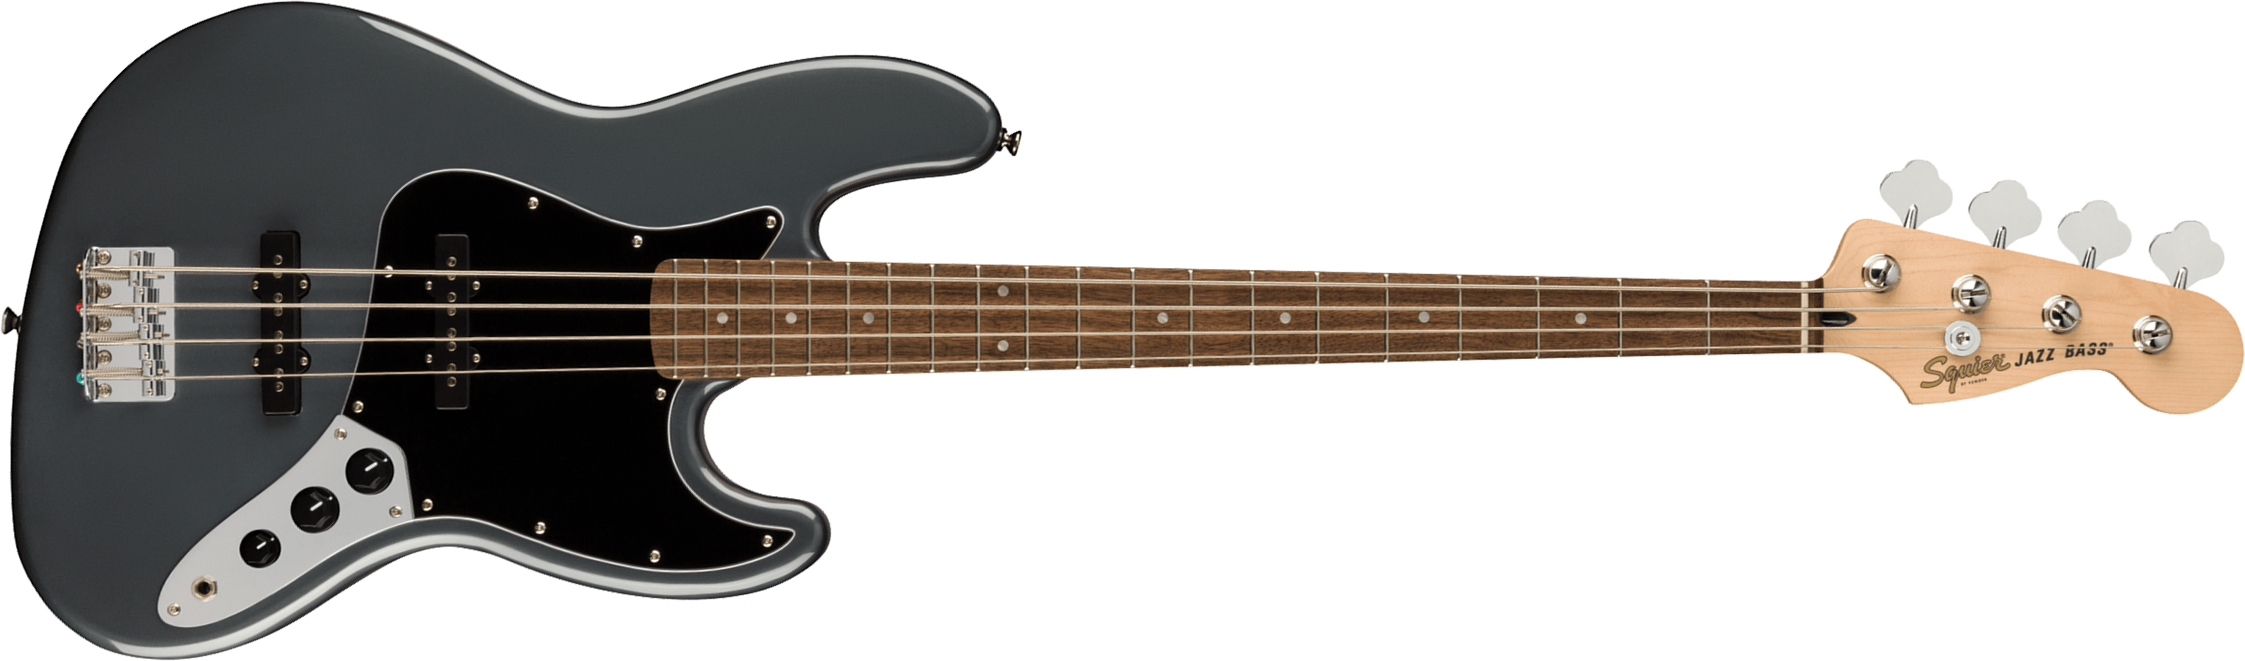 Squier Jazz Bass Affinity 2021 Lau - Charcoal Frost Metallic - Solid body elektrische bas - Main picture